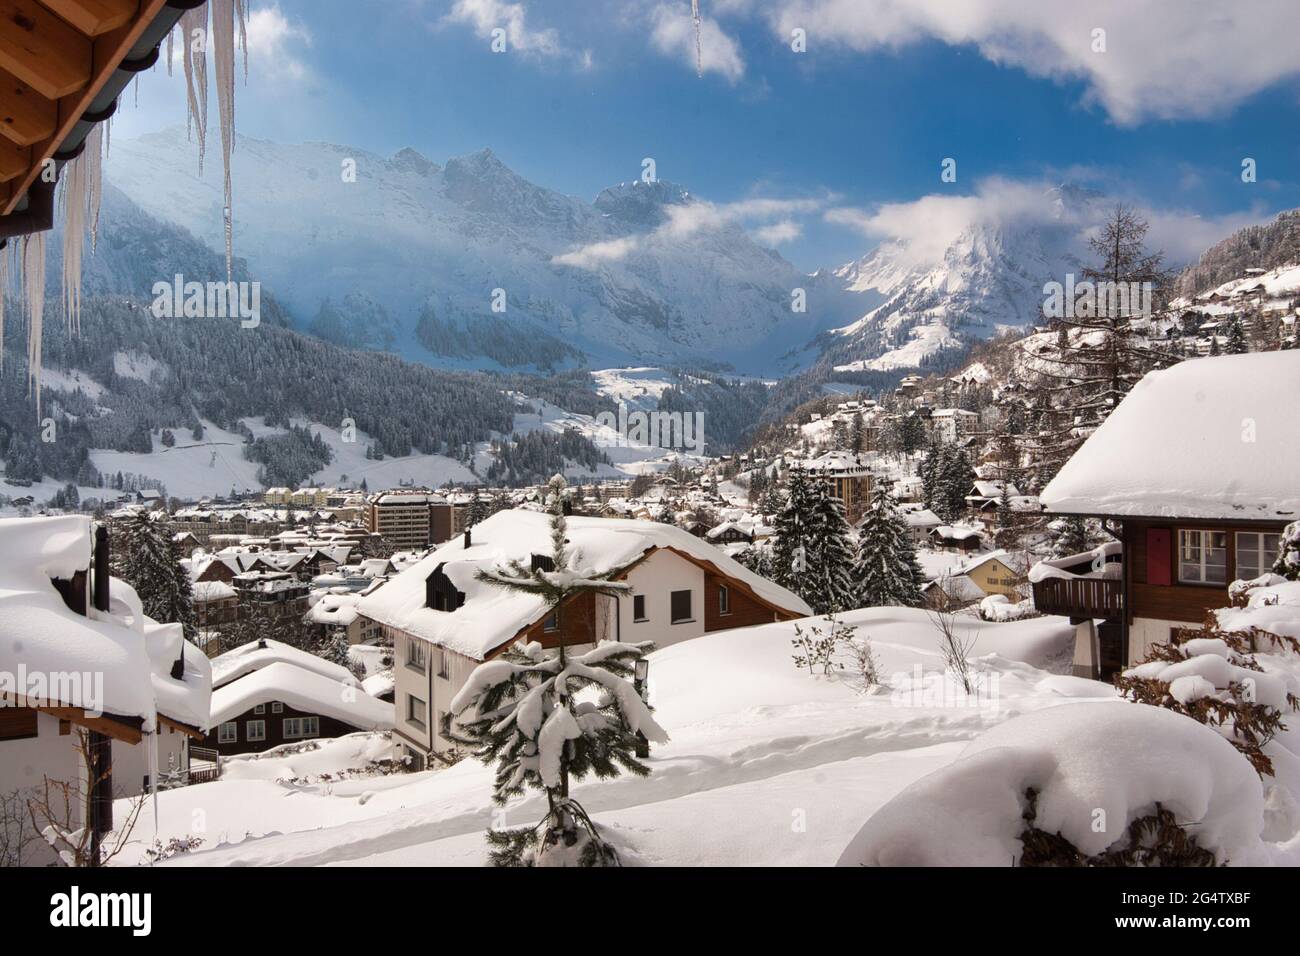 A winter scene of houses, chalets and rooftops covered in a thick layer of snow, also trees in Engelberg, Obwalden canton, central Switzerland Stock Photo